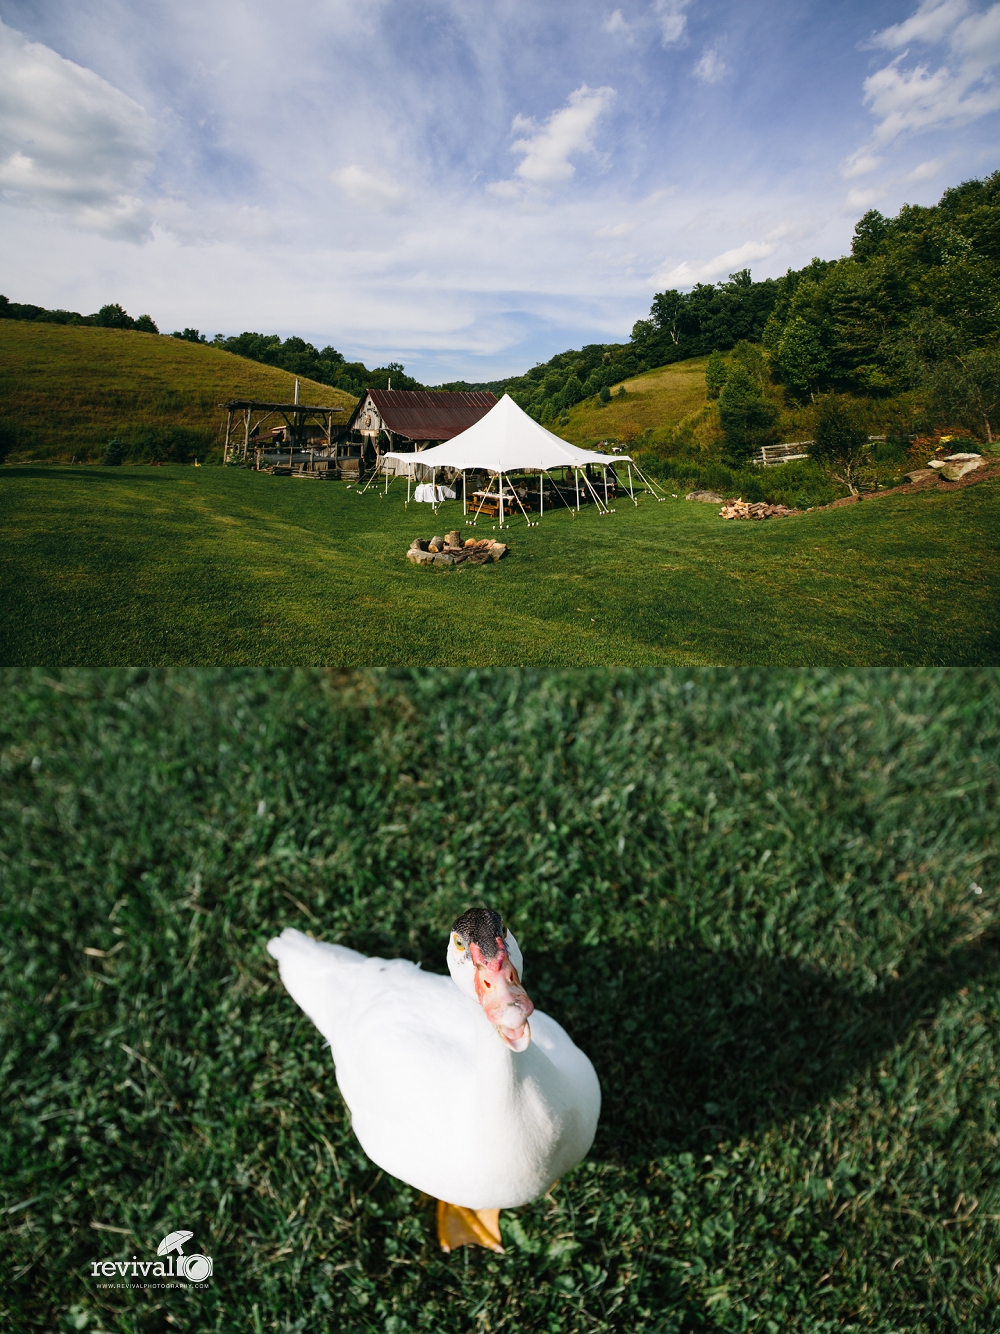 Photos by Revival Photography Weddings at White Fence Farm Tennessee Weddings Revival Photography www.revivalphotography.com 